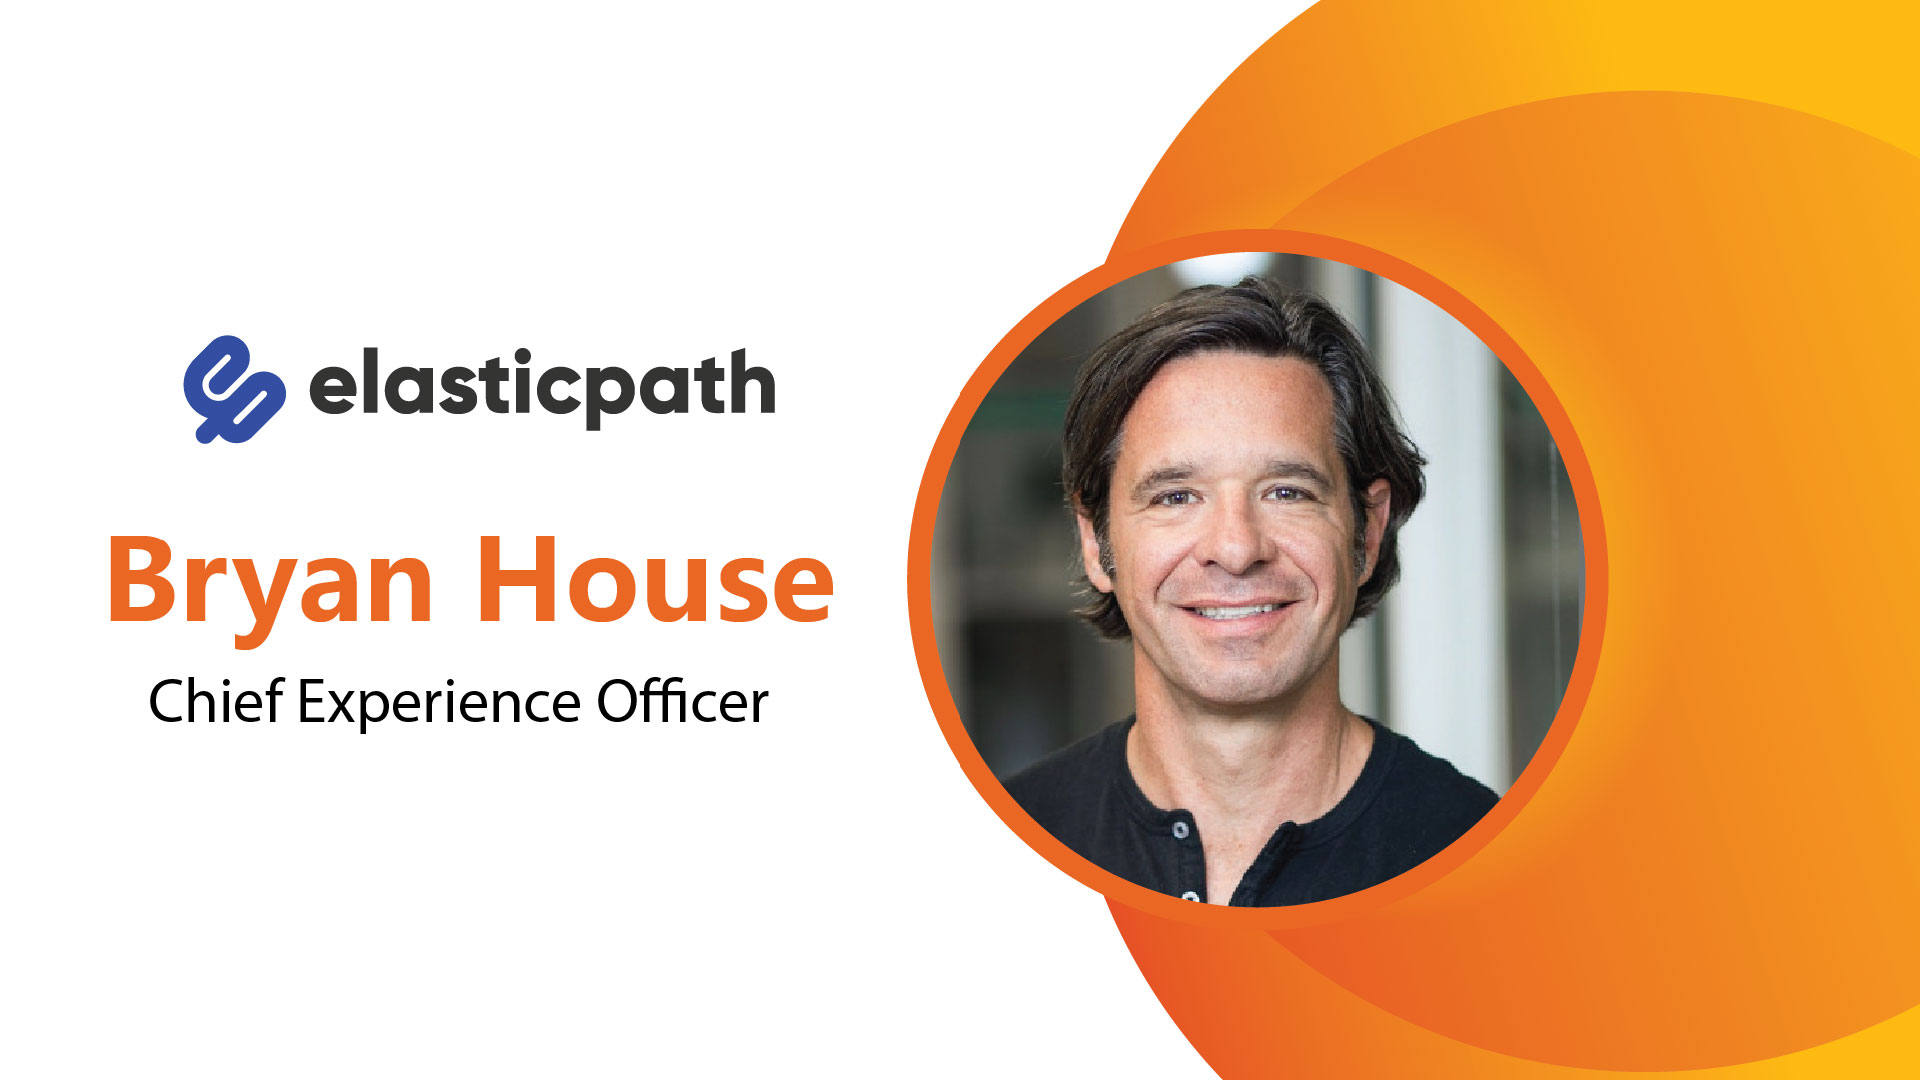  MarTech Edge Interview with Bryan House, Chief Experience Officer, Elastic Path